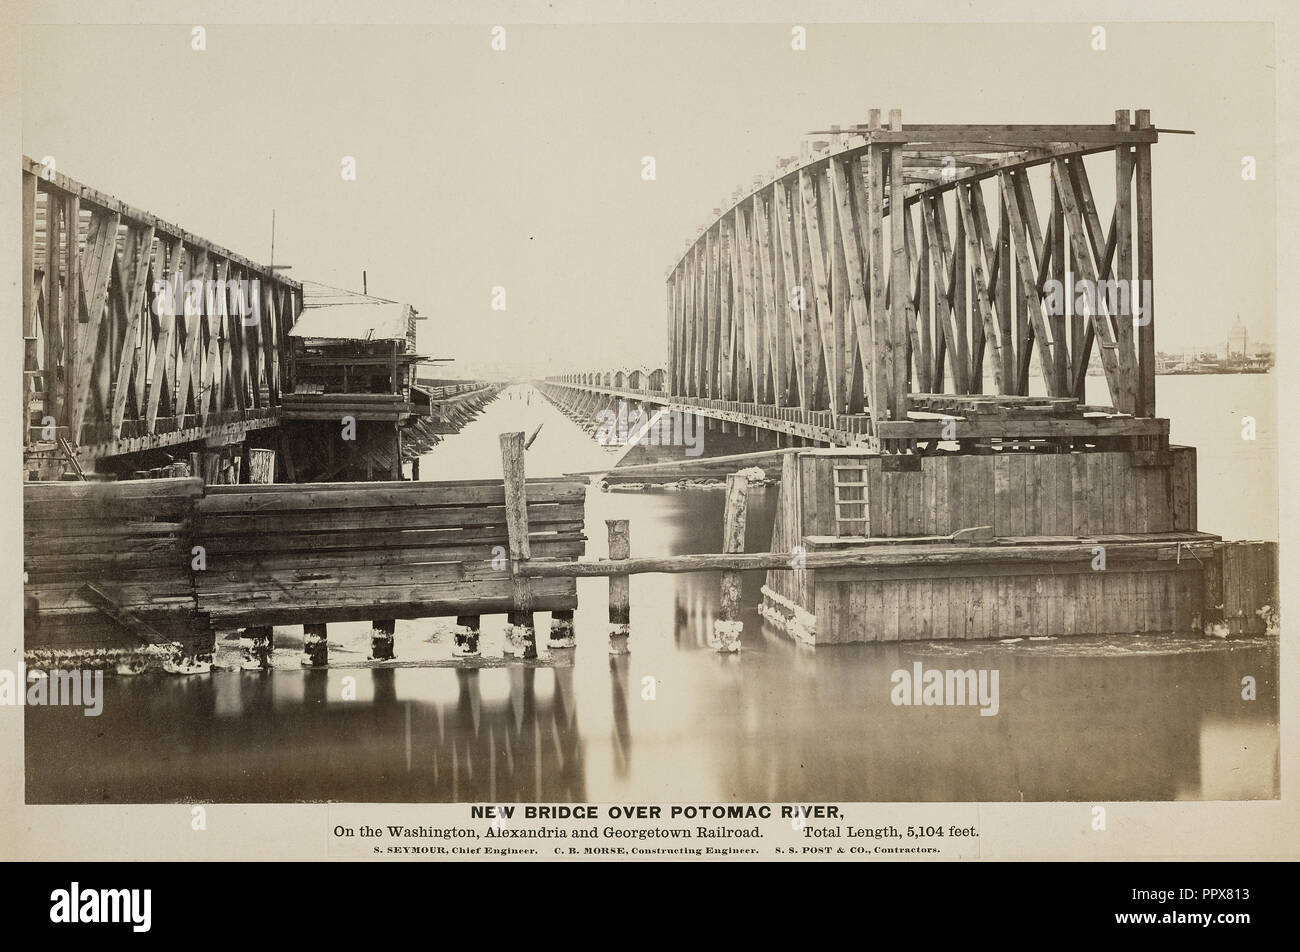 New Bridge over Potomac River. On the Washington, Alexandria and Georgetown Railroad. Total length 5,104 feet; A.J. Russell Stock Photo